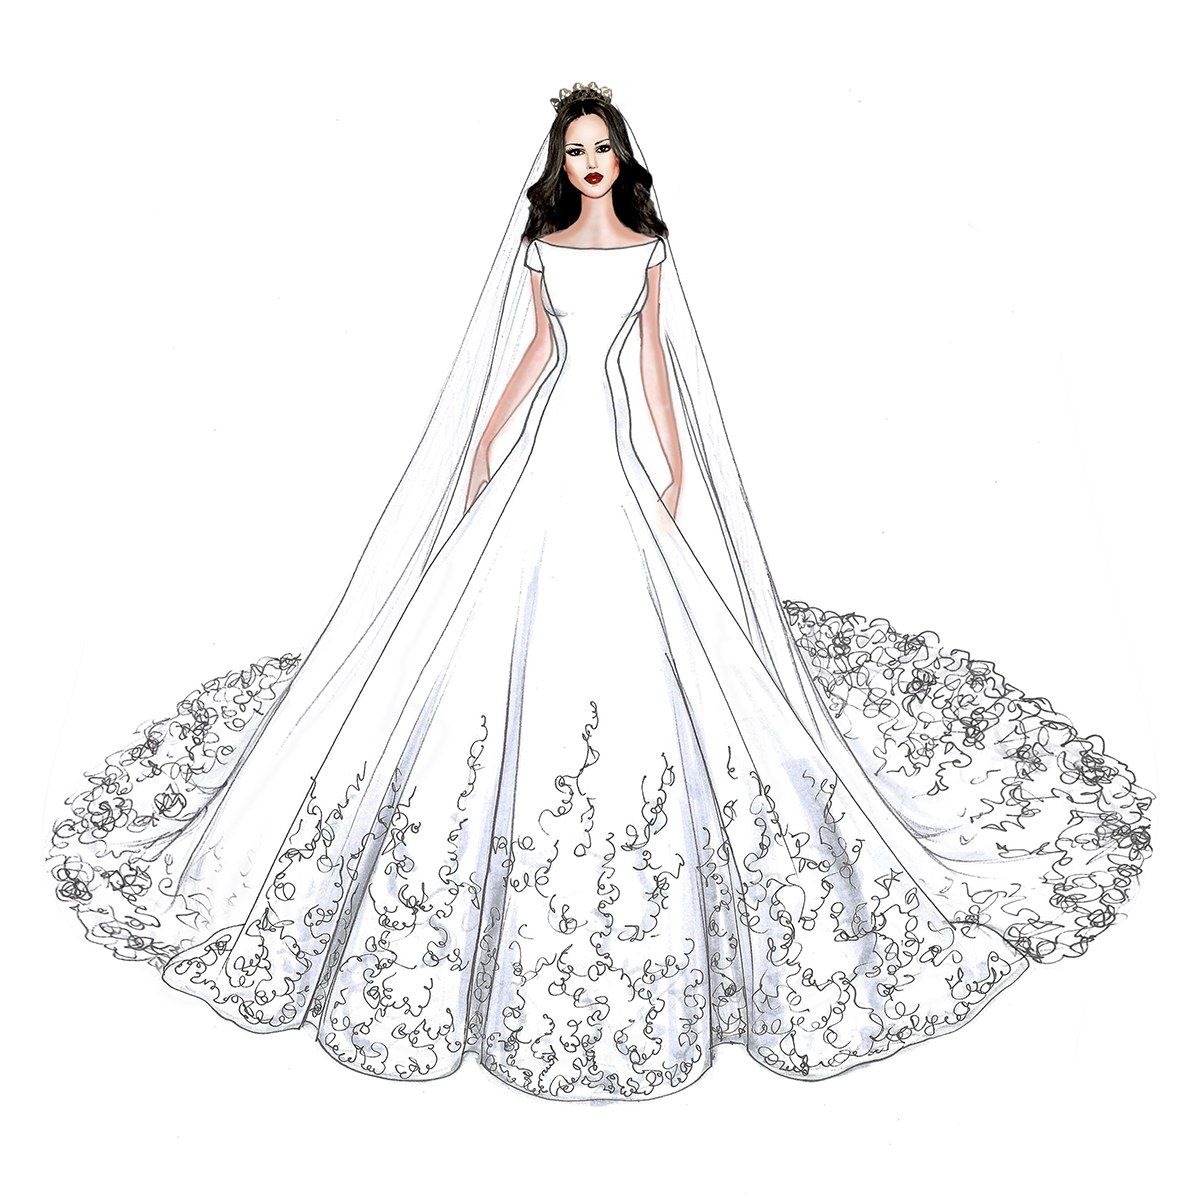 Ball Gown Sketch at PaintingValley.com | Explore collection of Ball ...